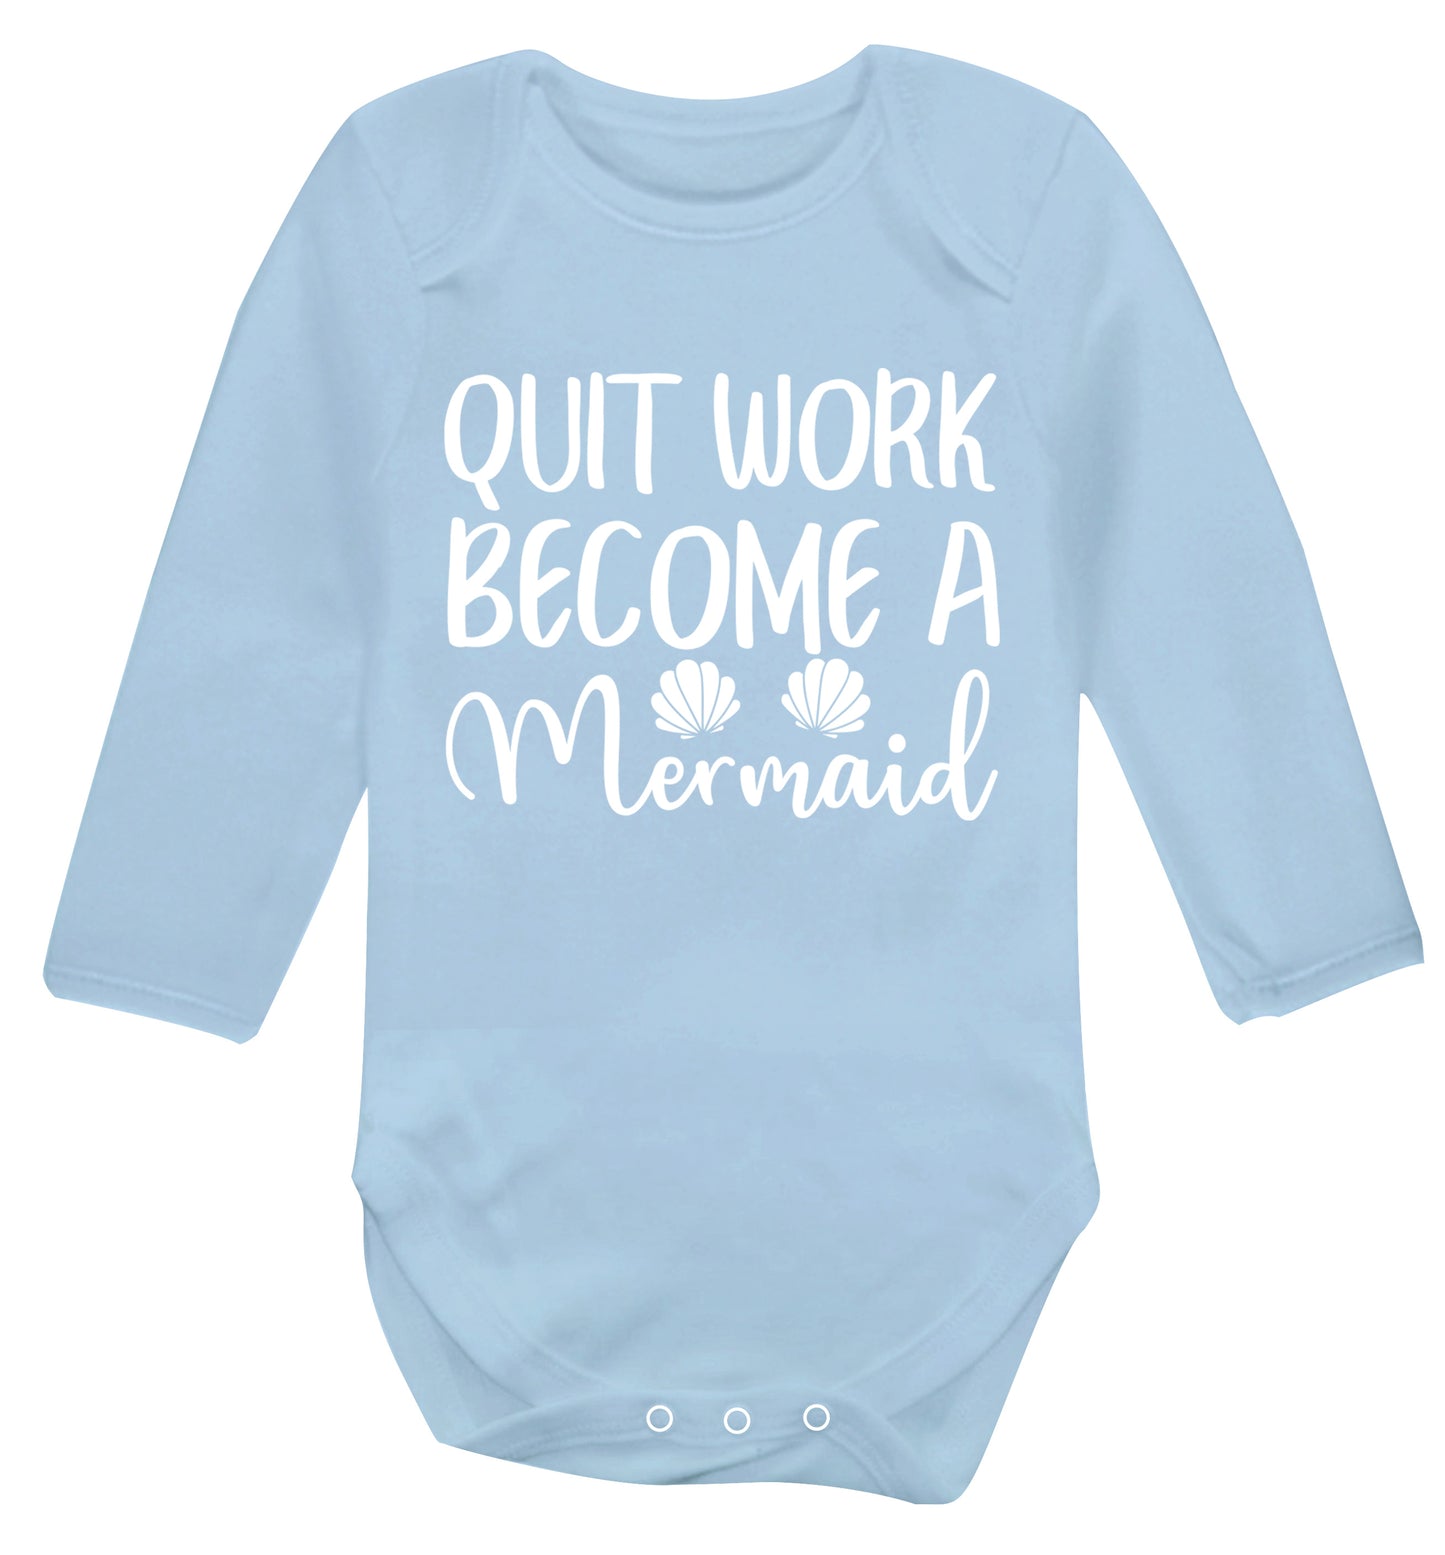 Quit work become a mermaid Baby Vest long sleeved pale blue 6-12 months